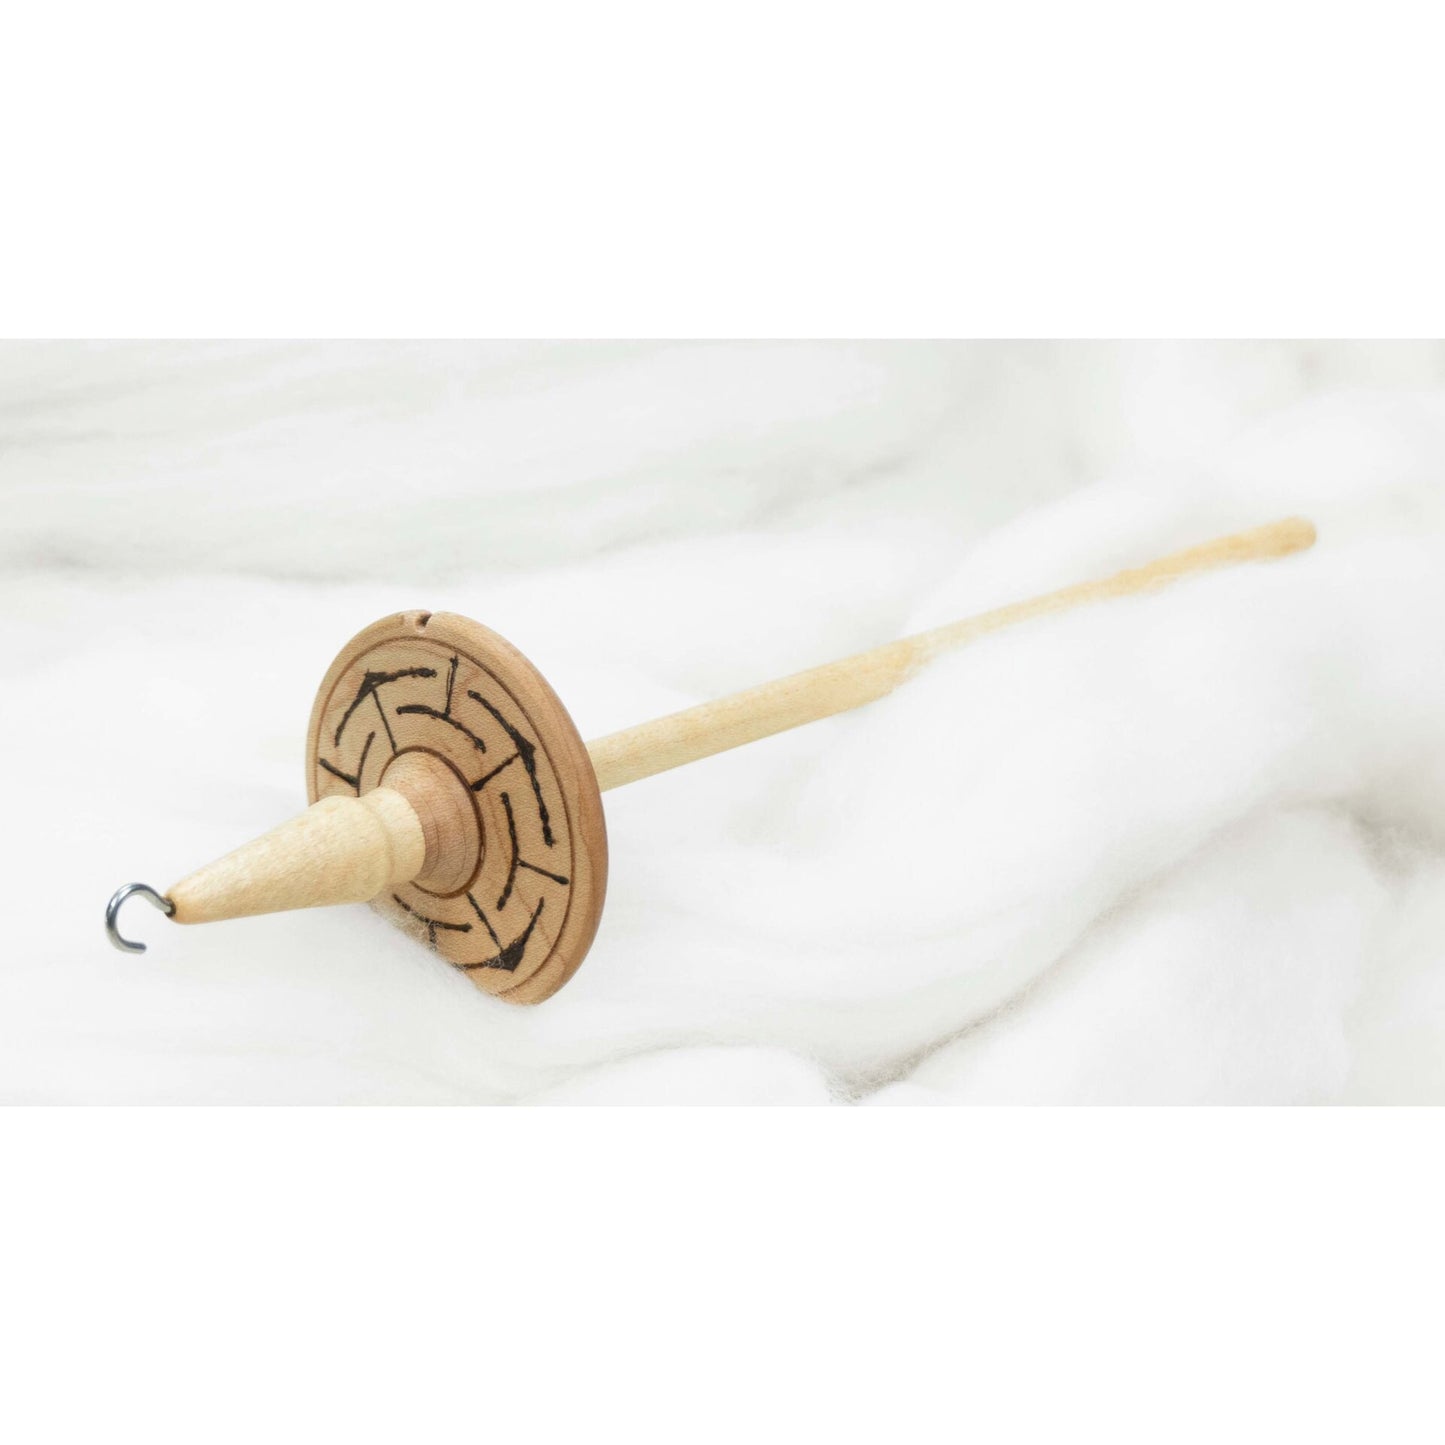 Labyrinth - Llina Hand-Turned Maple Wood Pyrograph Drop Spindle Lightweight Top Whorl 14 Grams